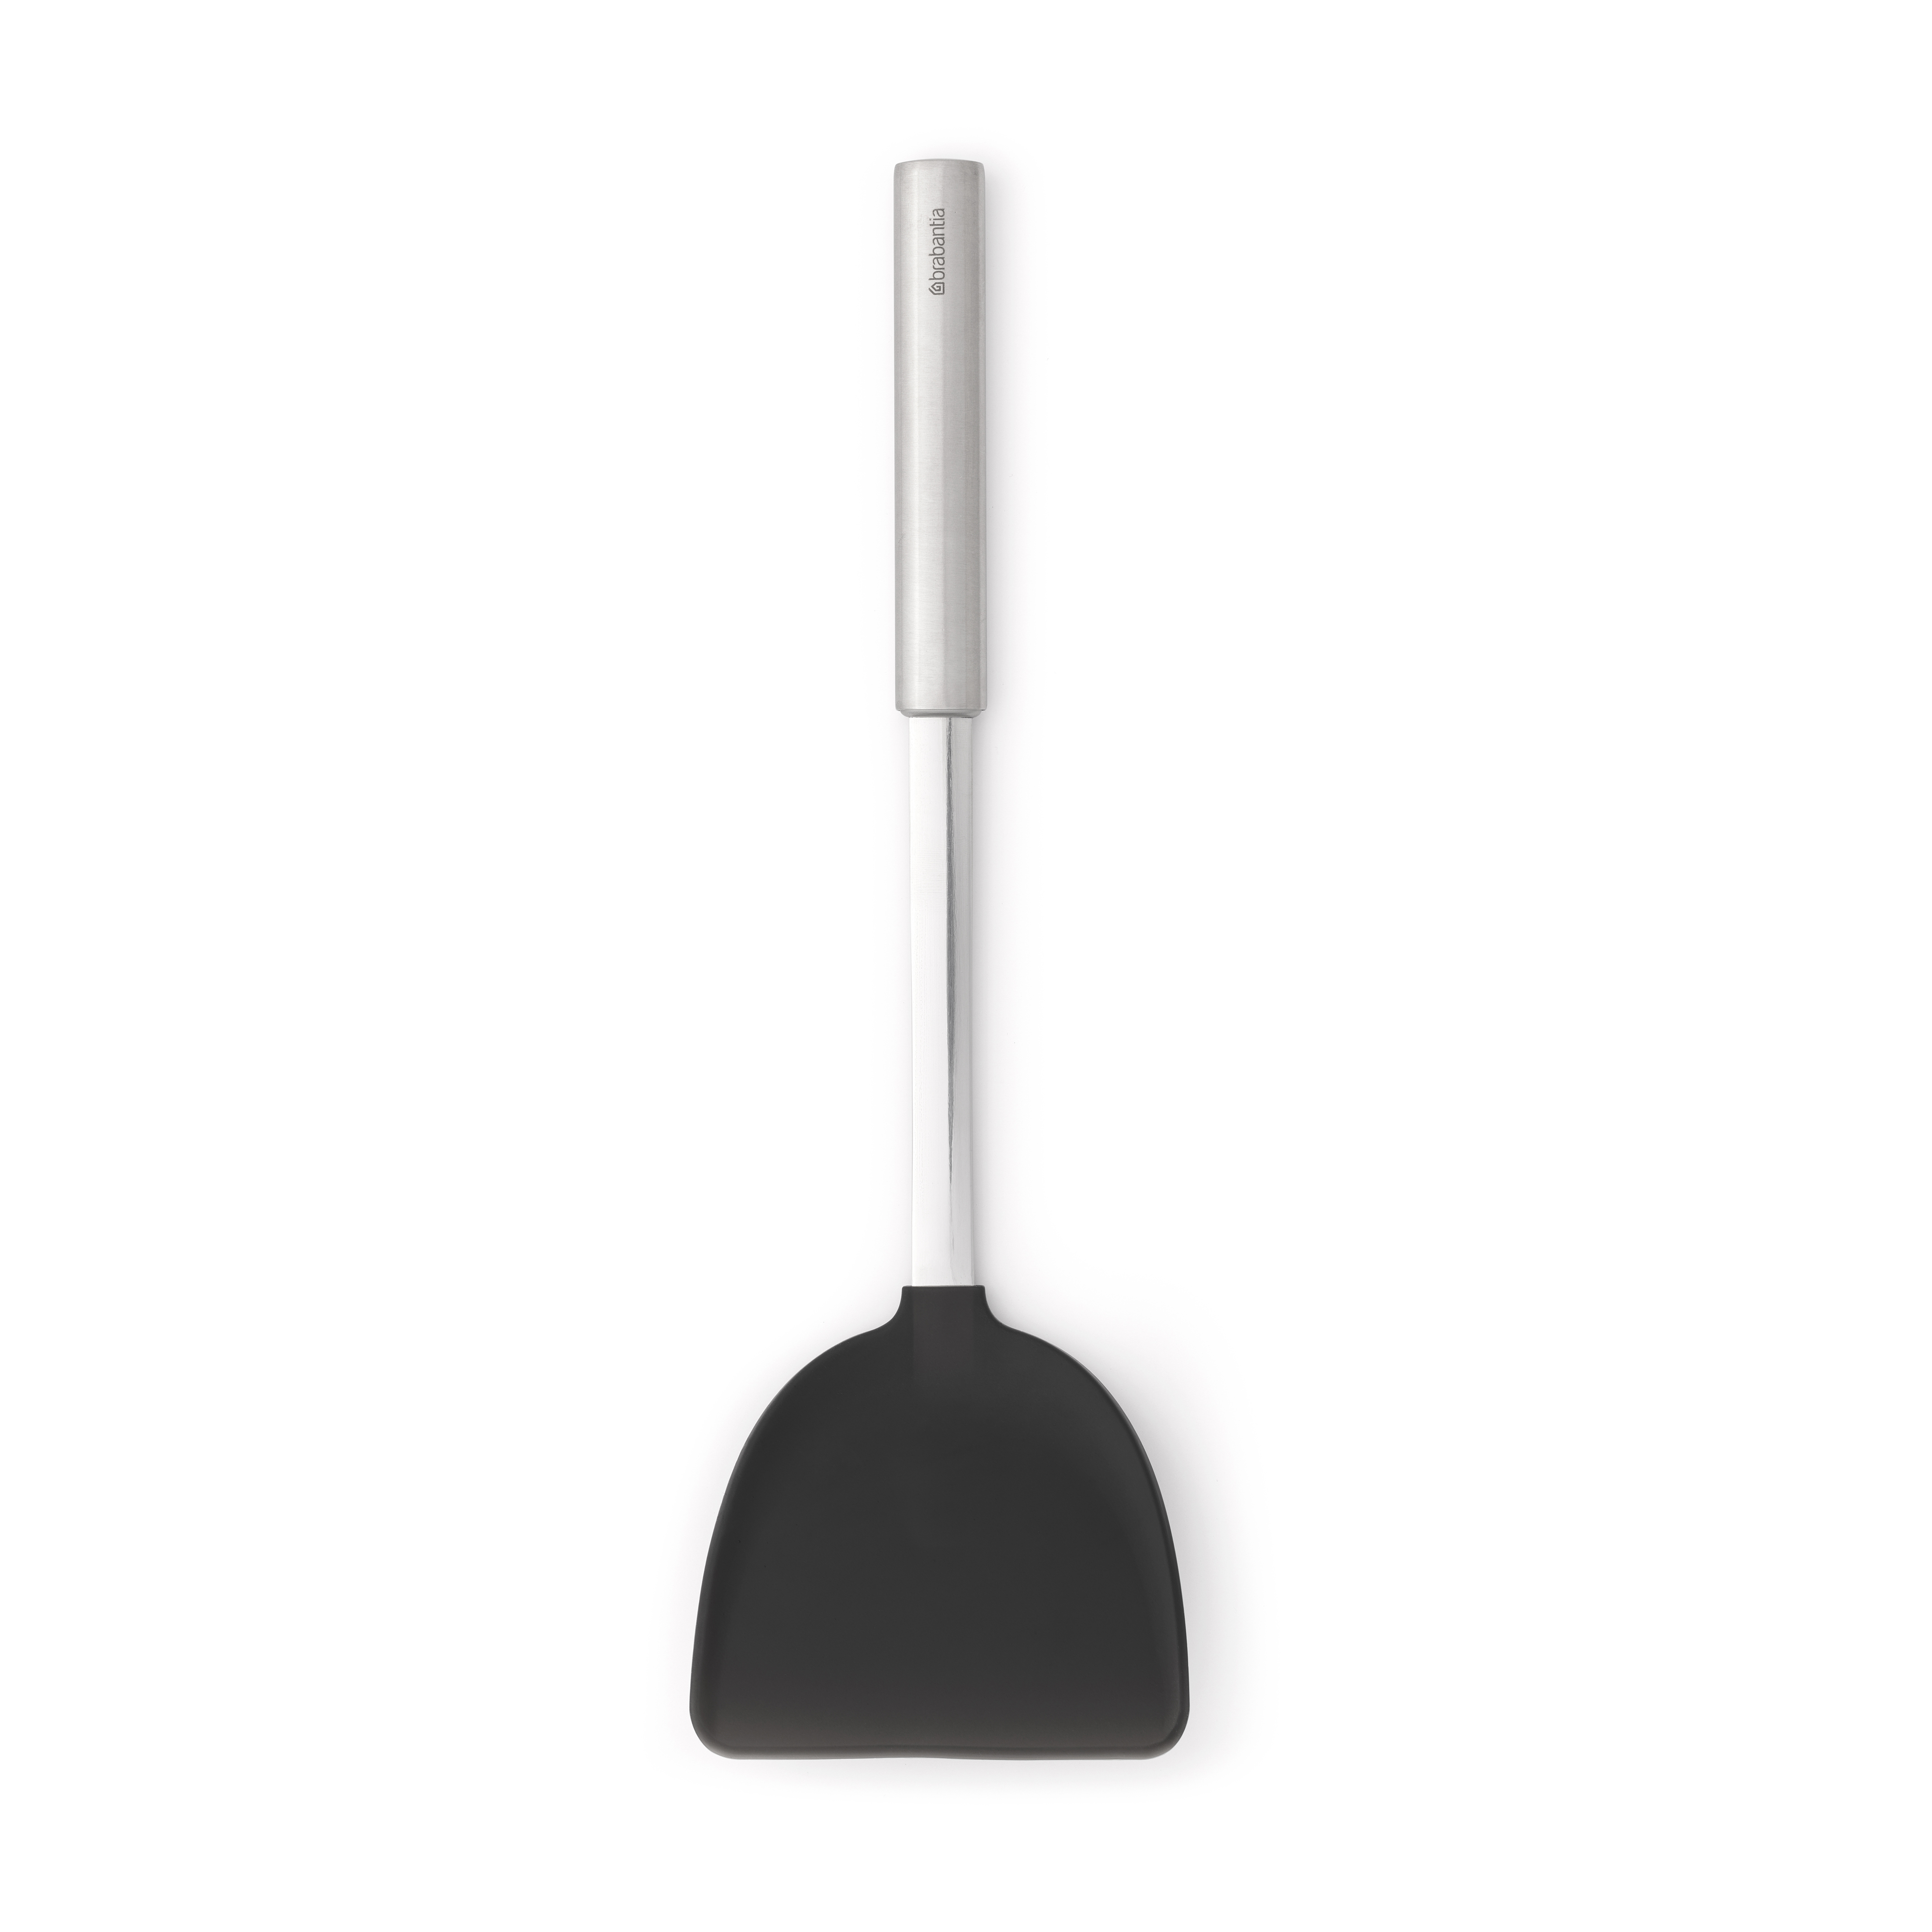 https://www.nordicnest.com/assets/blobs/brabantia-profile-wok-spatula-silicon-stainless-steel/502466-01_1_ProductImageMain-77805081c8.jpg